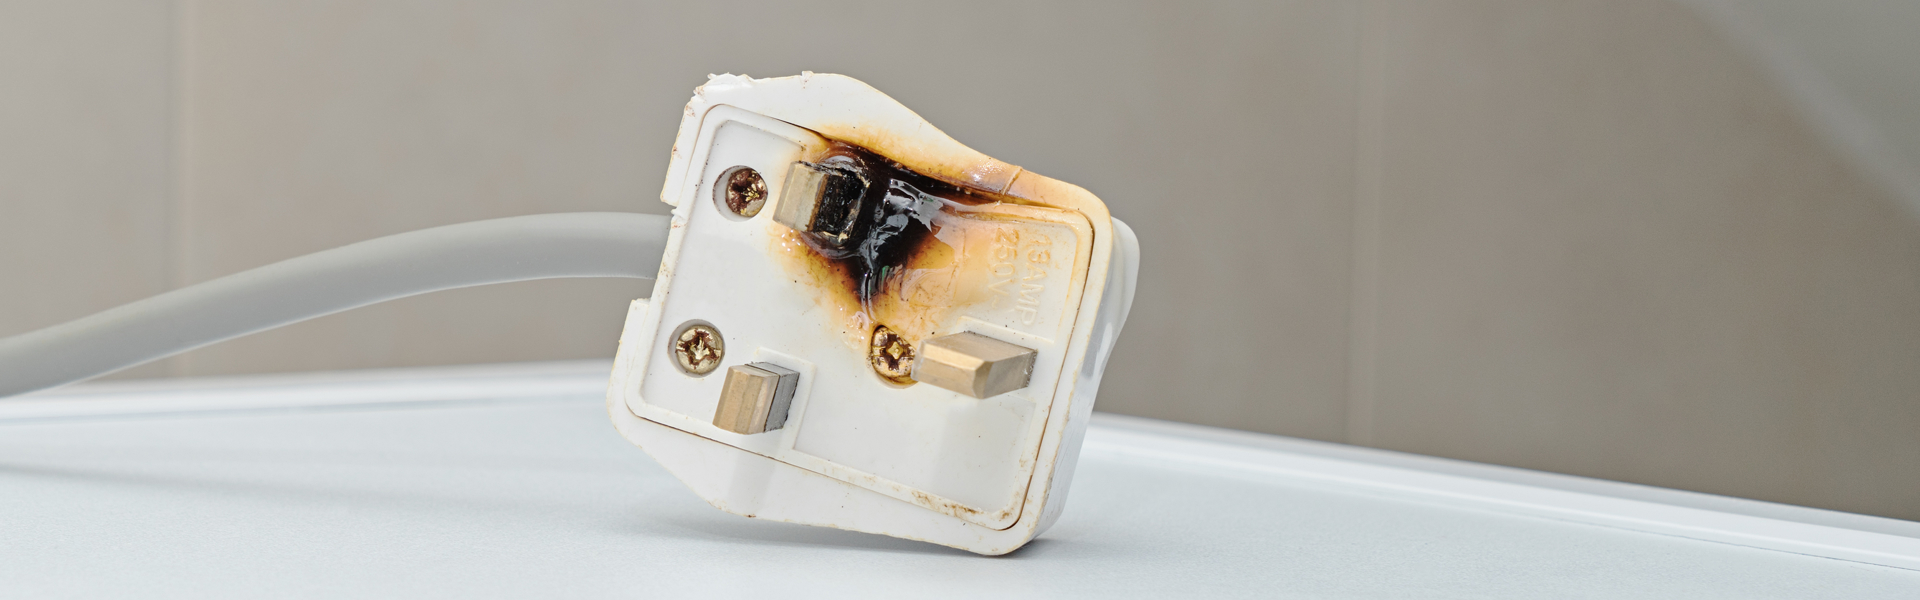 Plug that has been melted and burnt on one side lying on a white surface.